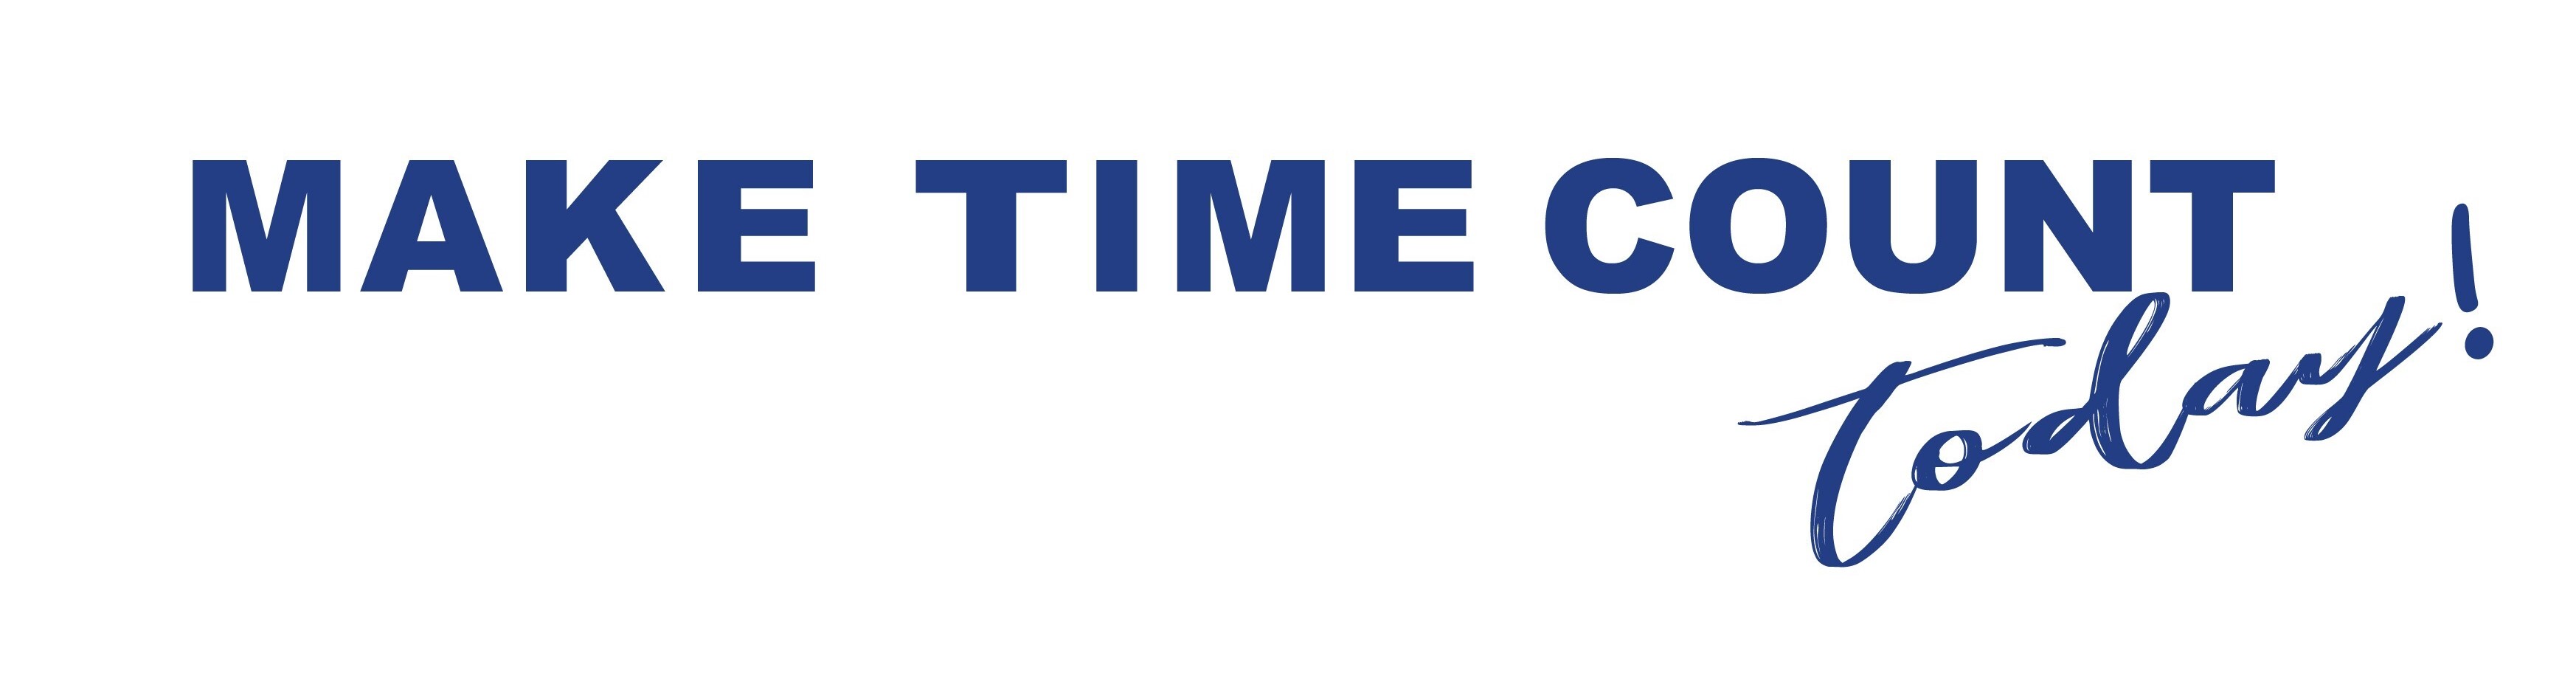 Make Time Count Today logo